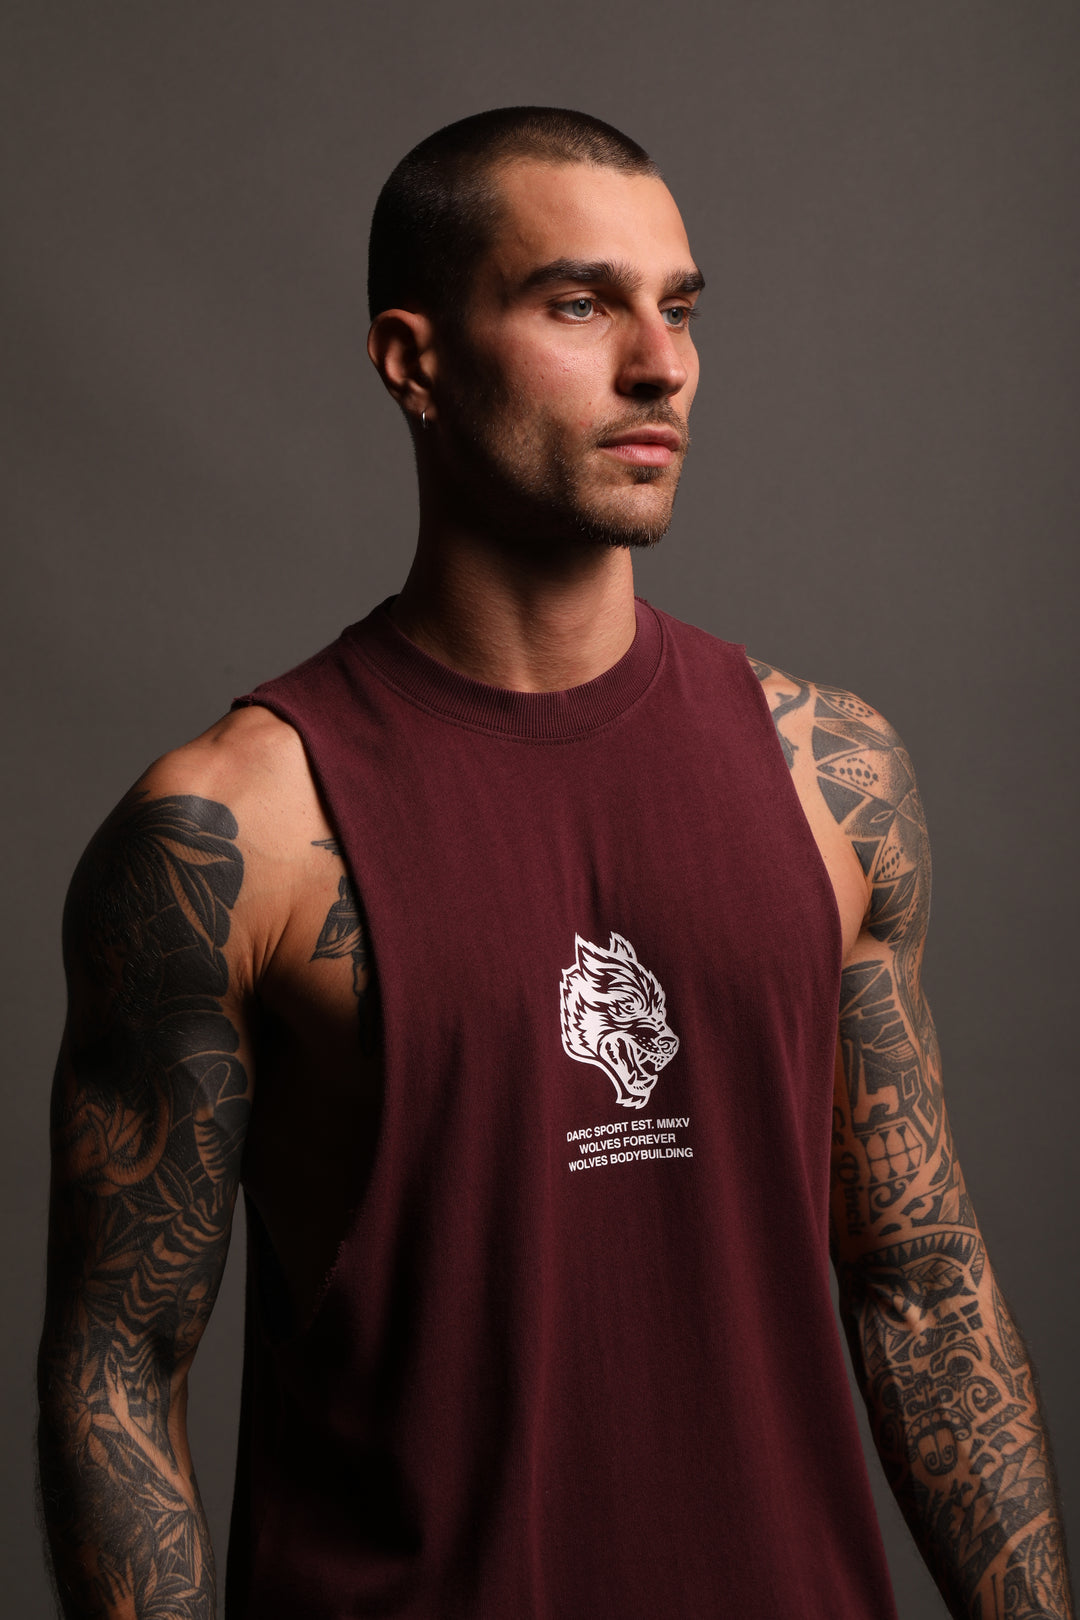 Pain "Tommy" Muscle Tee in Cherry Wine